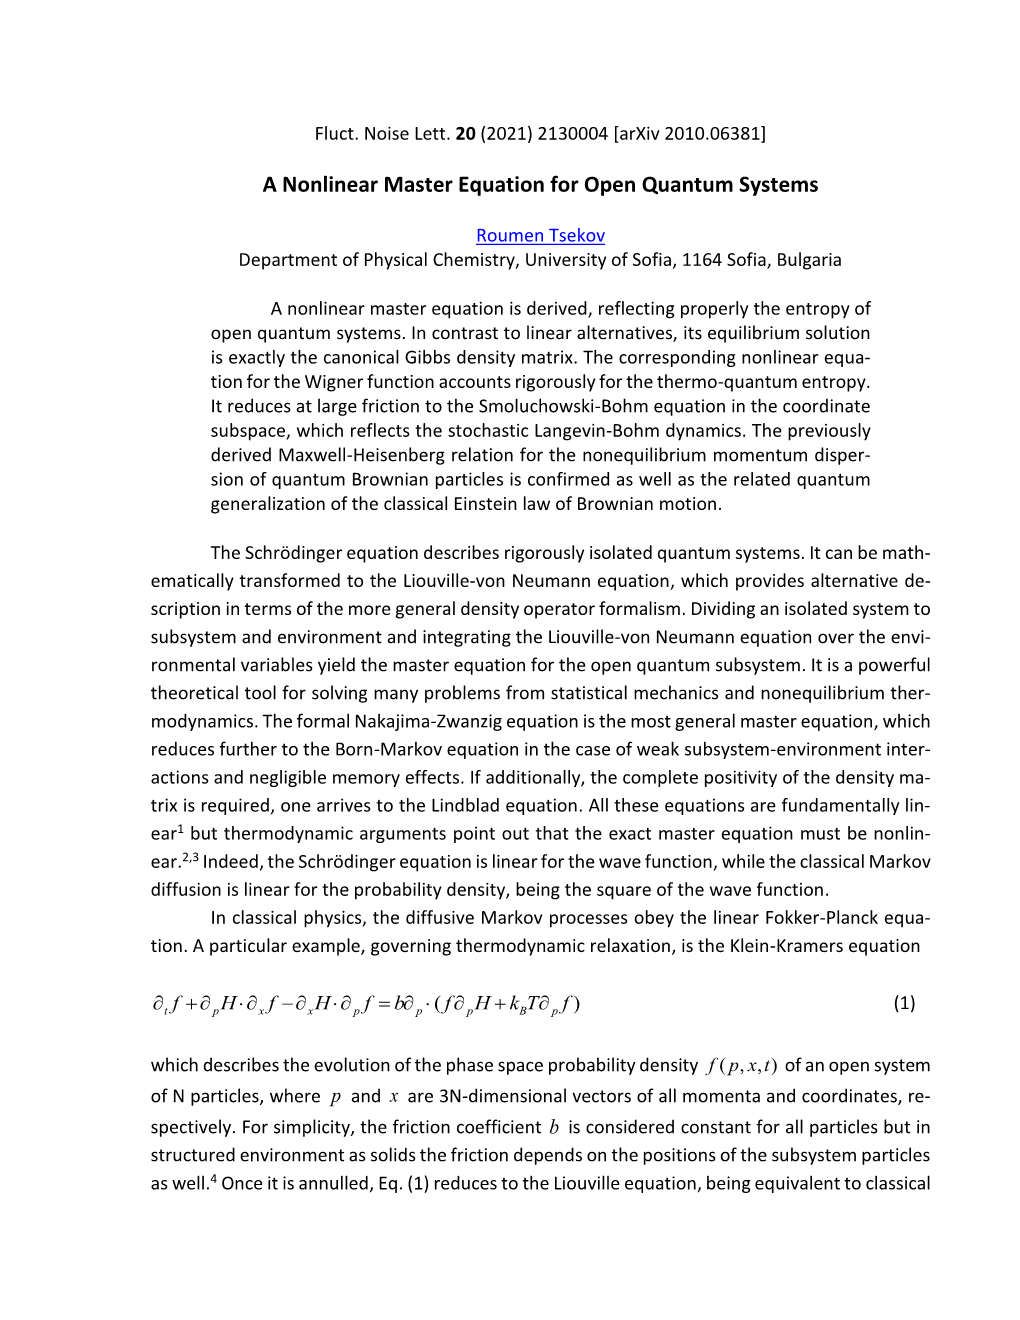 A Nonlinear Master Equation for Open Quantum Systems